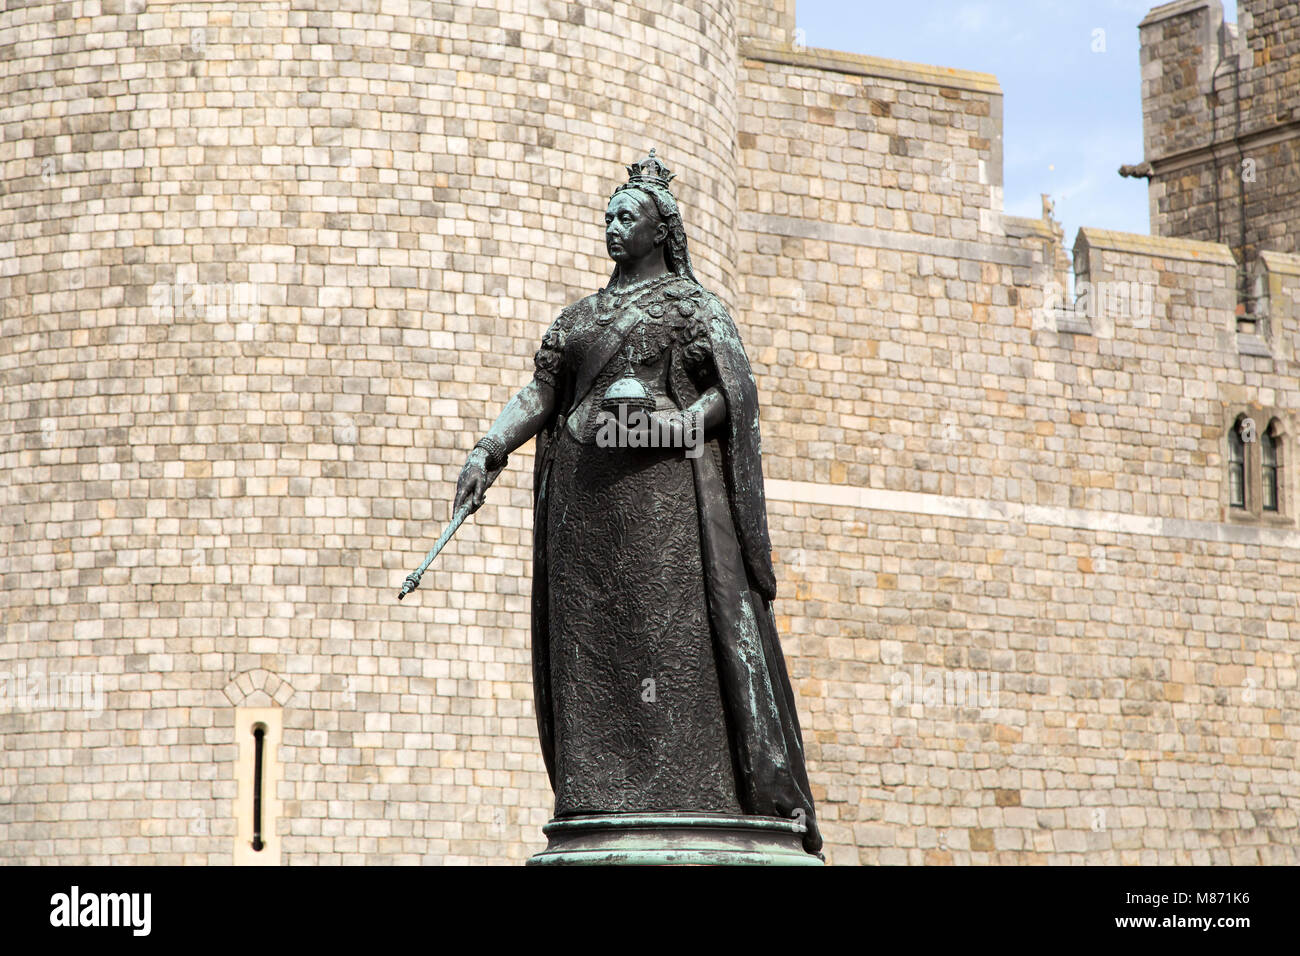 Statue of Queen Victoria outside of Windsor Castle in Windsor, England. The monarch ruled from 1837 to 1901 and was also the Empress of India. Stock Photo